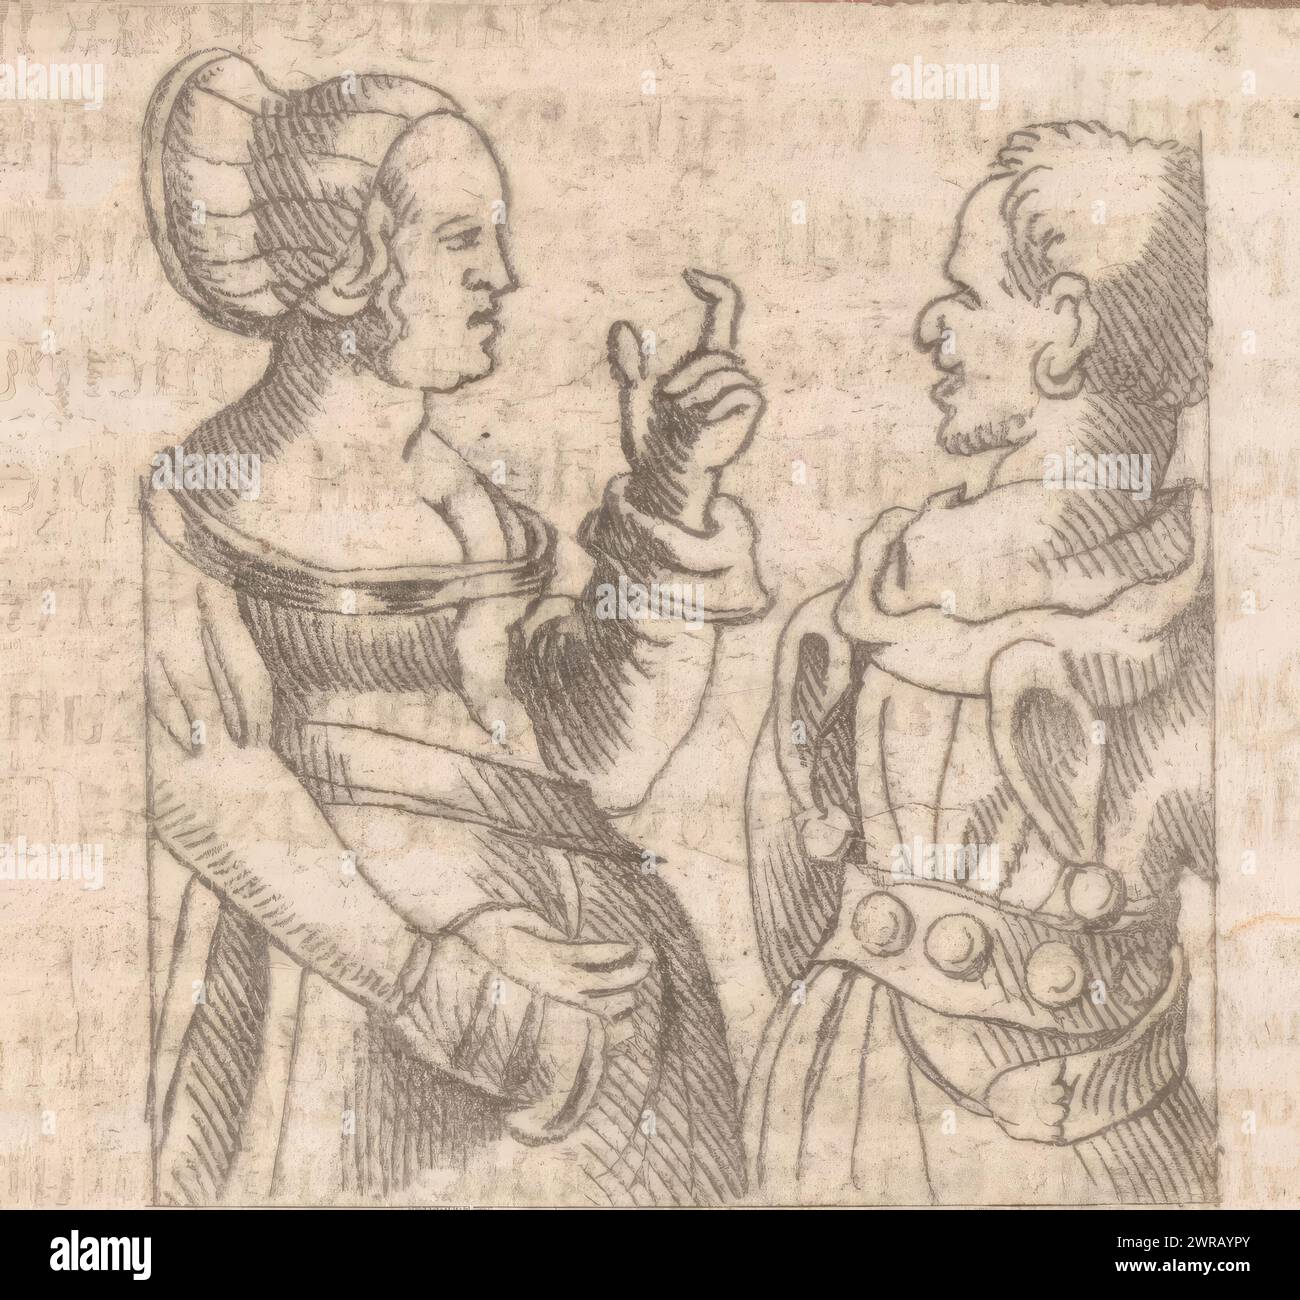 Jester turns to a gesticulating woman, Illustrations from the Praise of Folly (series title), print maker: Caspar Merian, after drawing by: Hans Holbein (II), after drawing by: Ambrosius Holbein, 1516 and/or 1676, paper, etching, letterpress printing, height 51 mm × width 60 mm, print Stock Photo